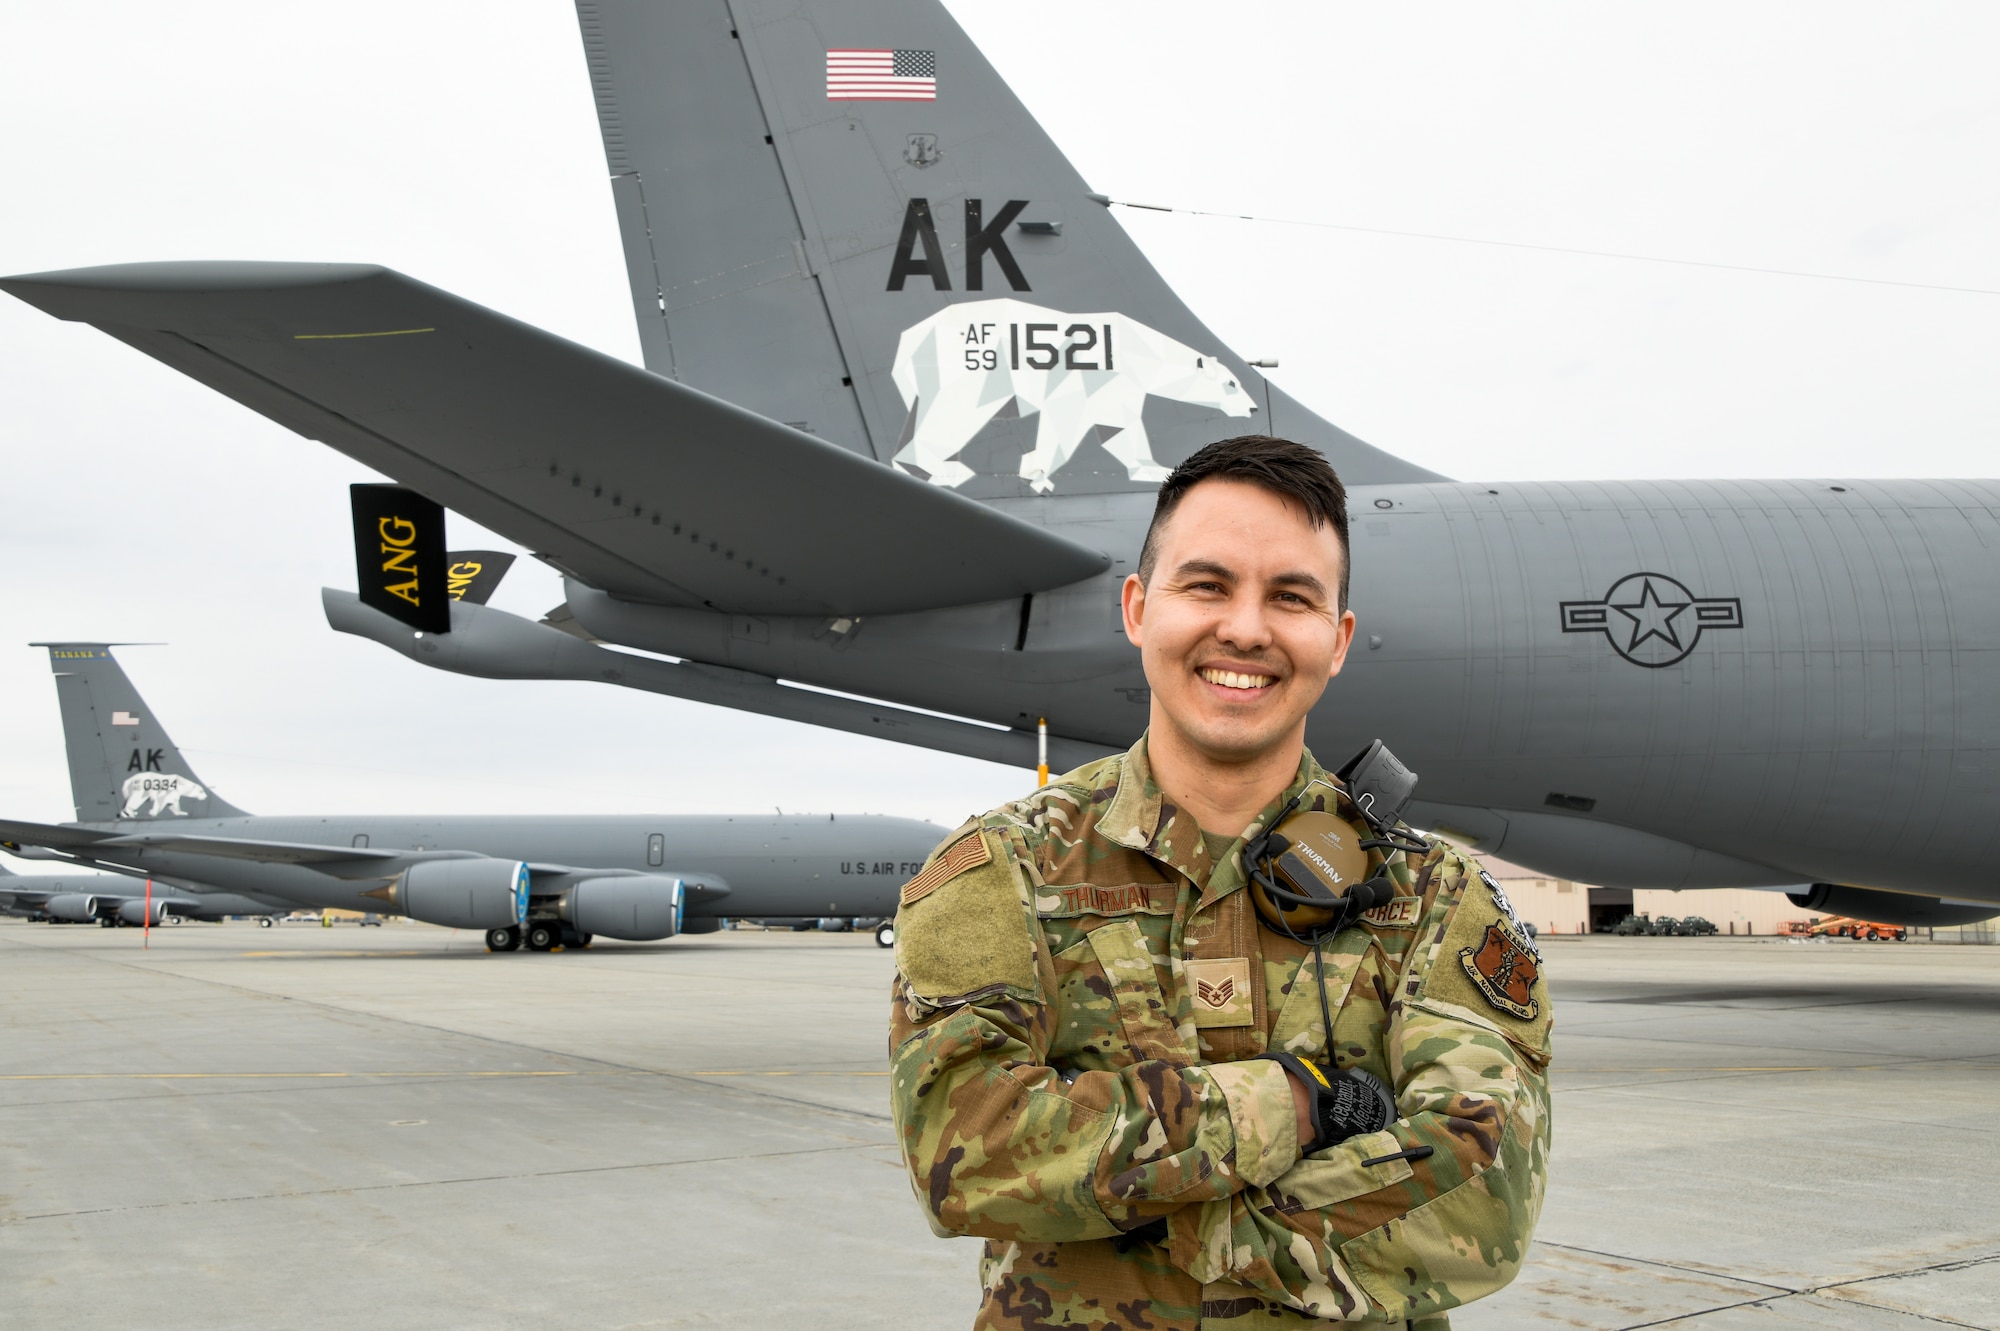 Staff Sgt. David Thurman, a crew chief with the 168th Wing, Alaska Air National Guard, poses for a photo in front of a 168th Wing KC-135 Stratotanker at Eielson Air Force Base. The Alaska Air National Guard KC-135s provide air refueling, joint force lethality, and deter aggression across the Pacific. (U.S. Air National Guard photo by Senior Master Sgt. Julie Avey)